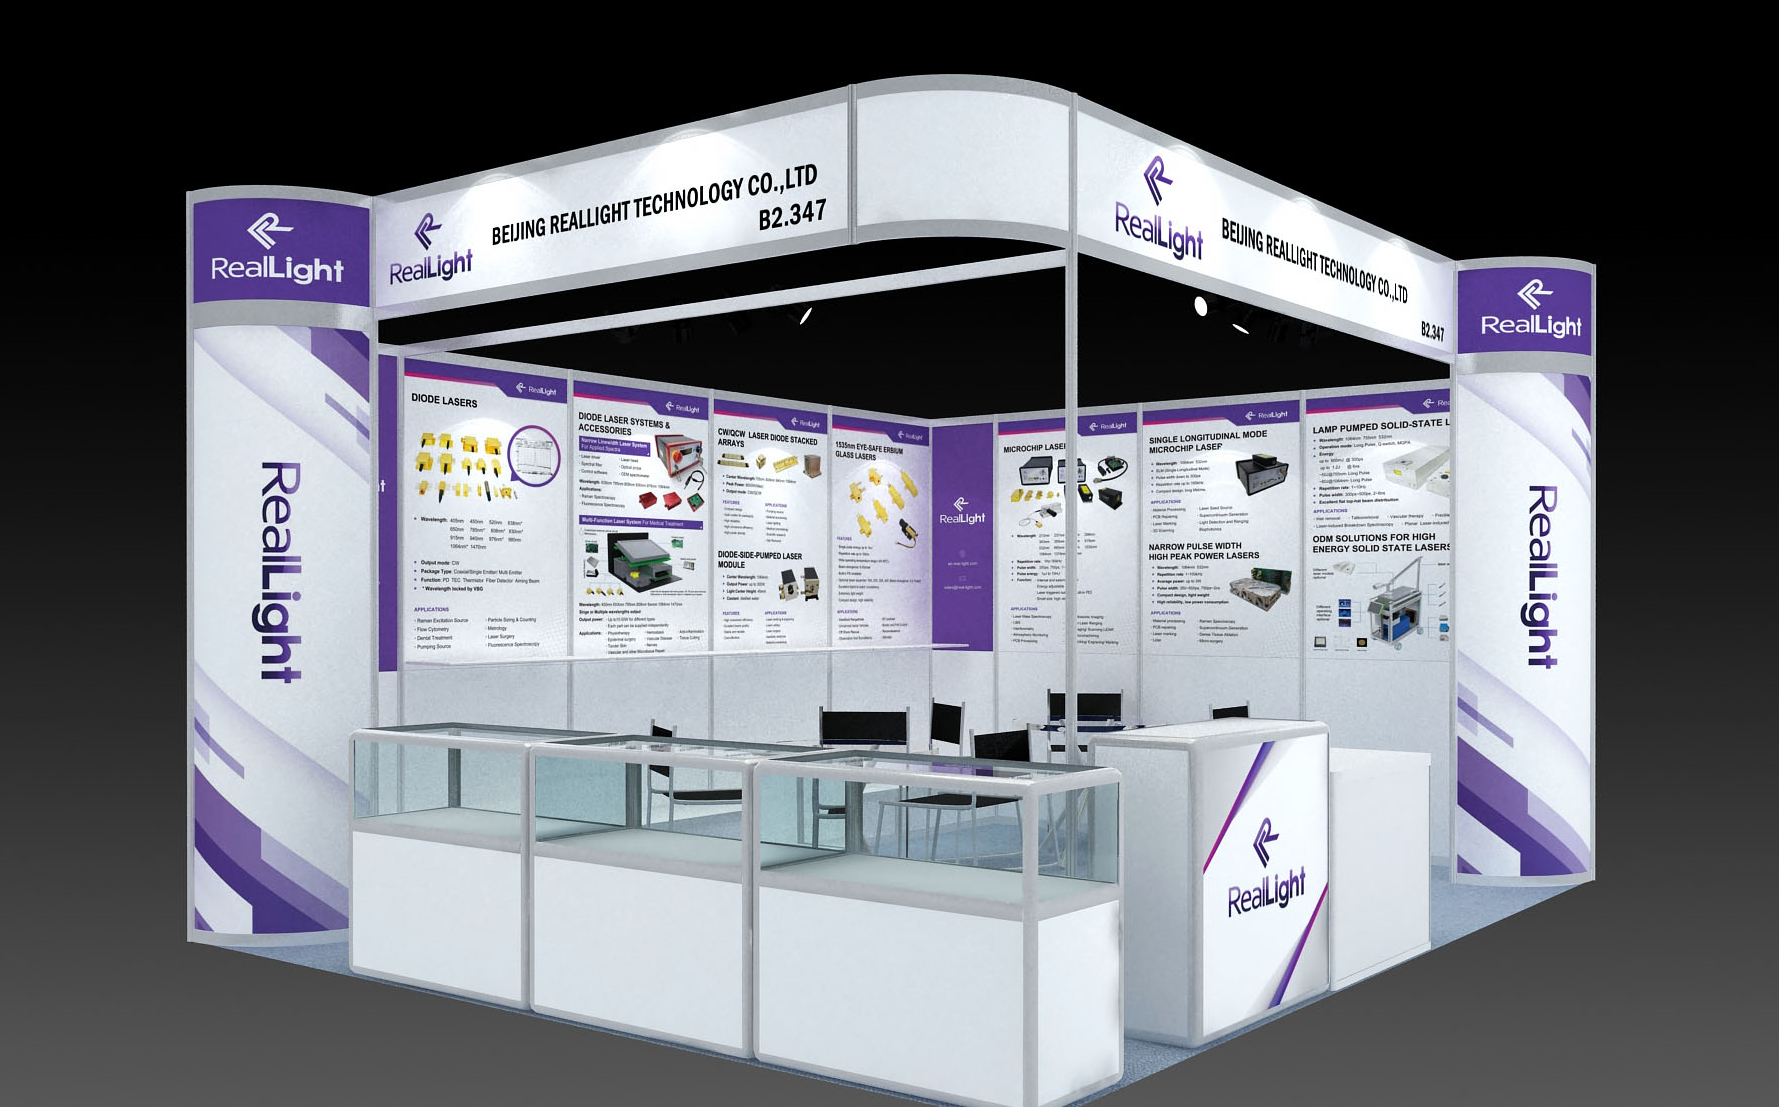 Come and visit us at LASER World of PHOTONICS 2023